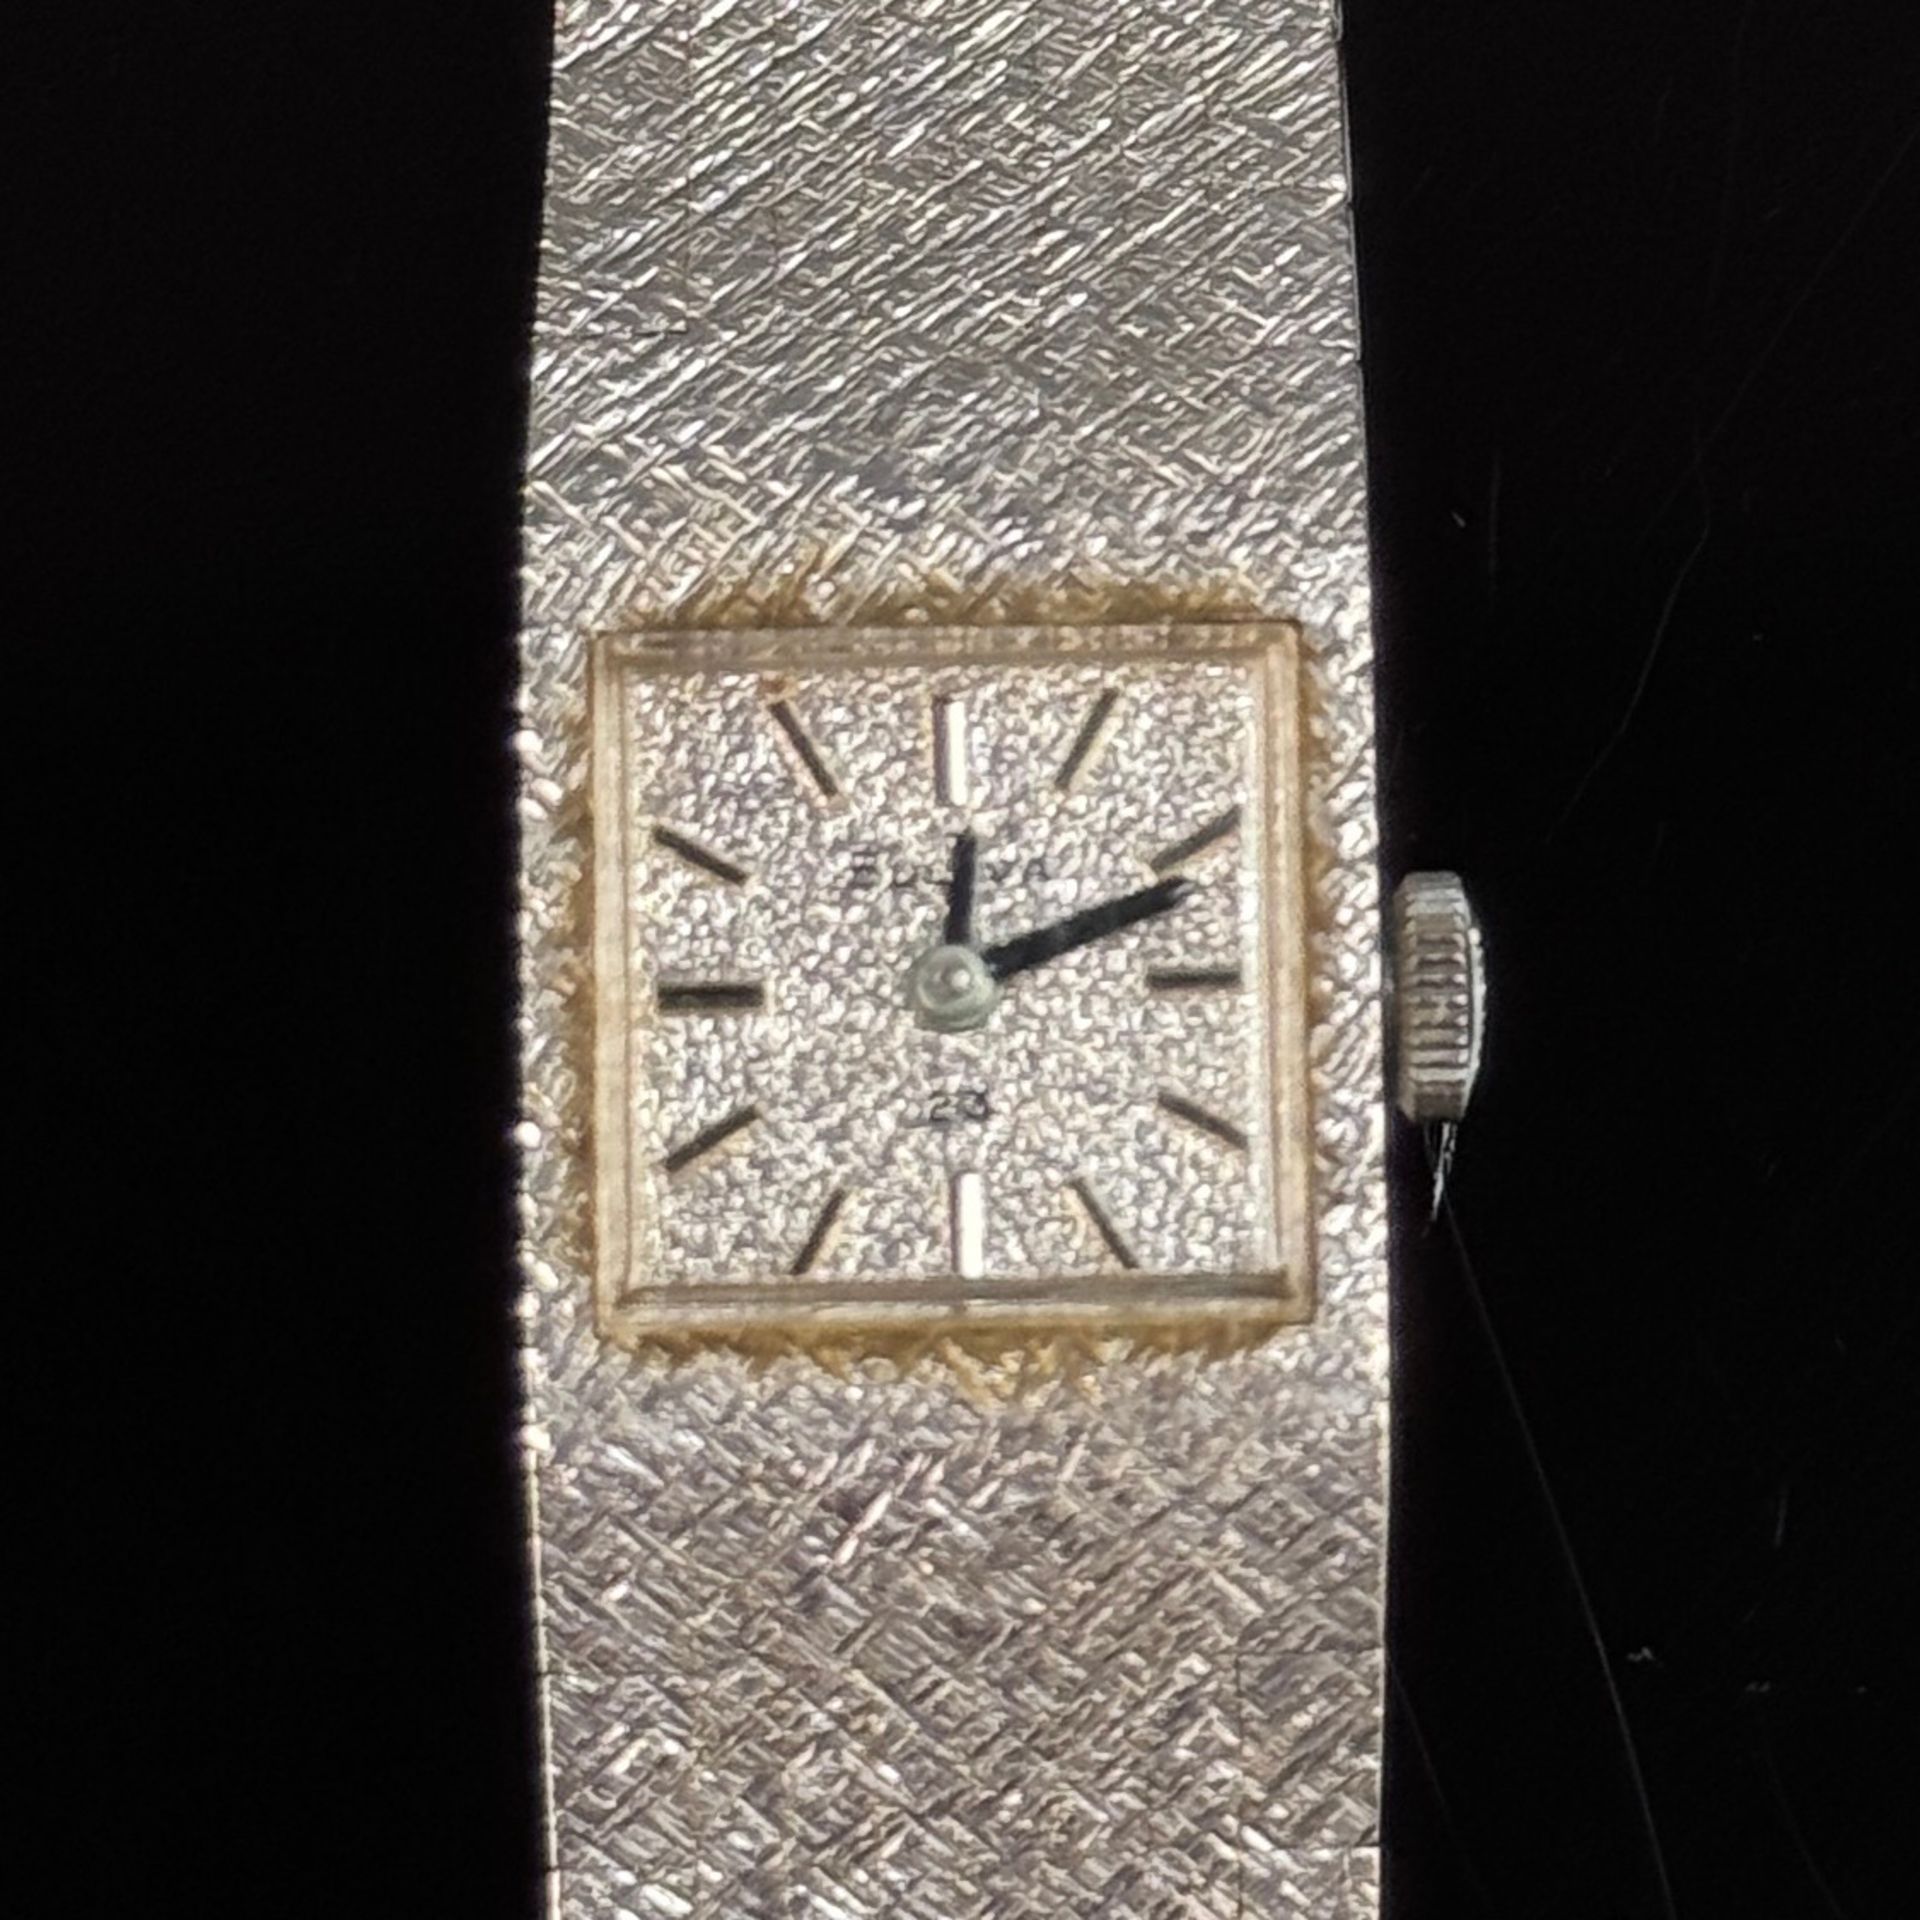 Wristwatch, Bulova, 585/14K white gold (hallmarked), total weight 38.1g, rectangular case and dial - Image 2 of 3